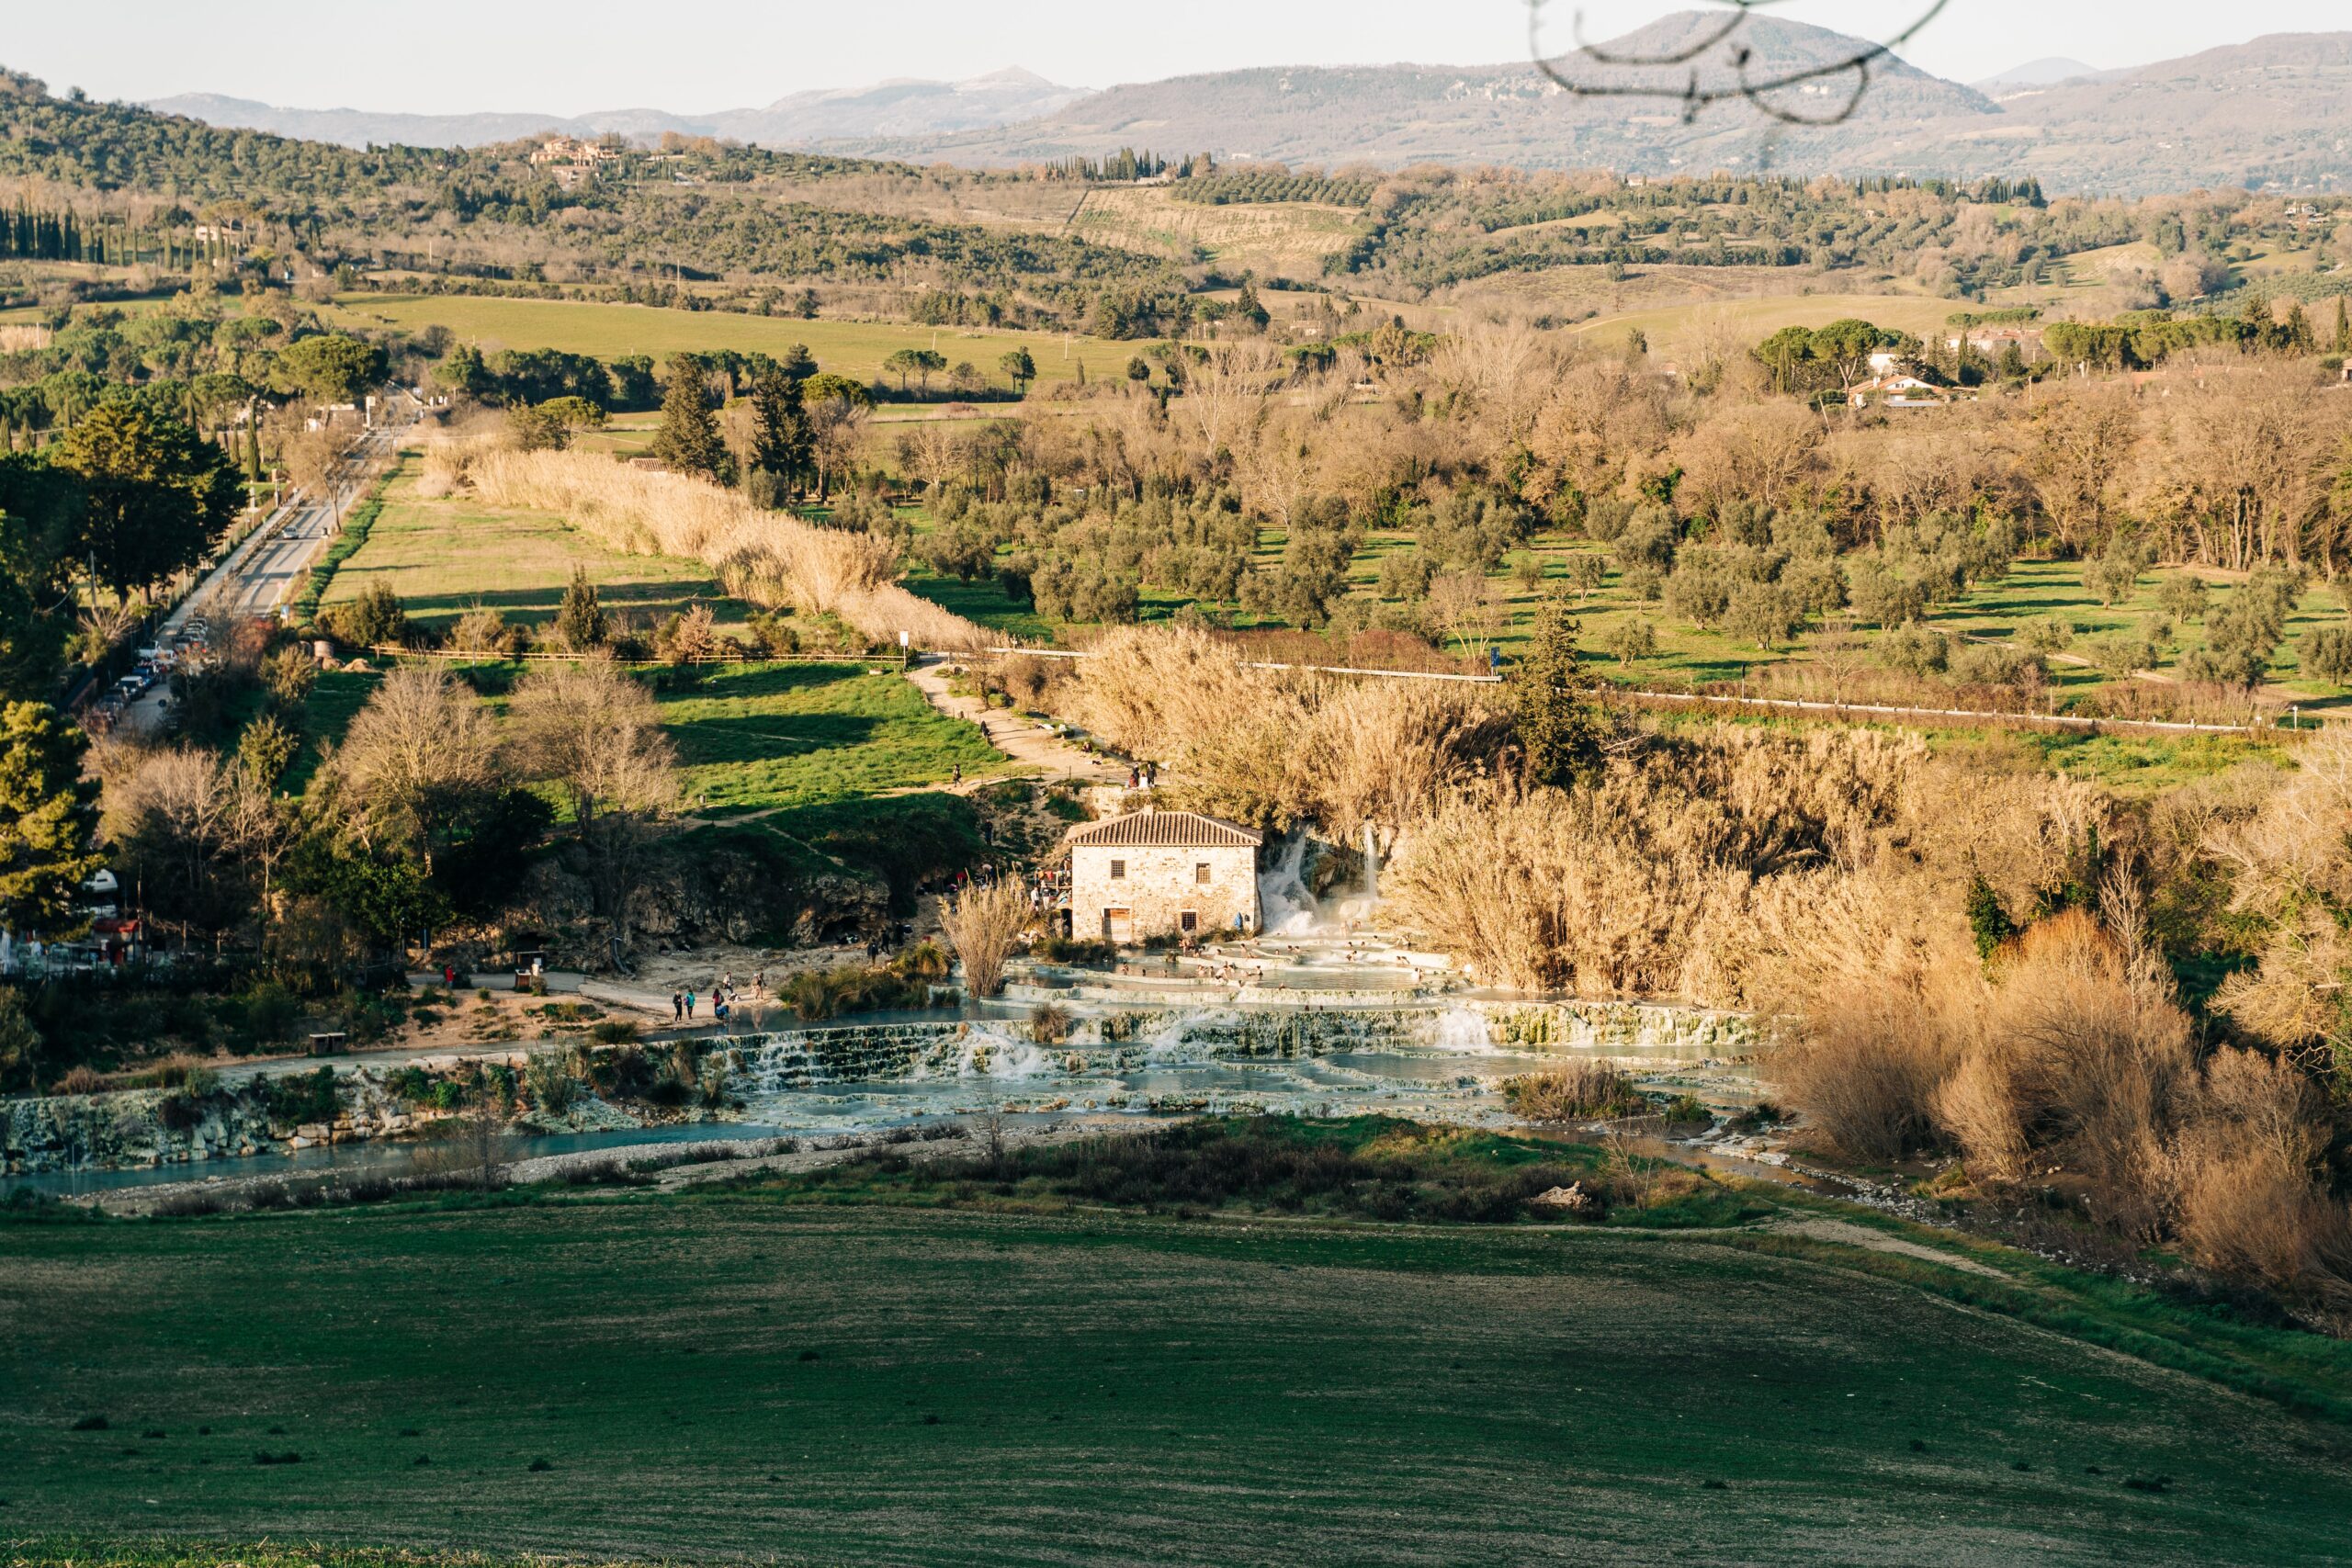 Saturnia, Italy is a hidden gem that travelers should visit. It is even enjoyable all year round.
pictured: the hills near Saturnia hot springs during the fall 